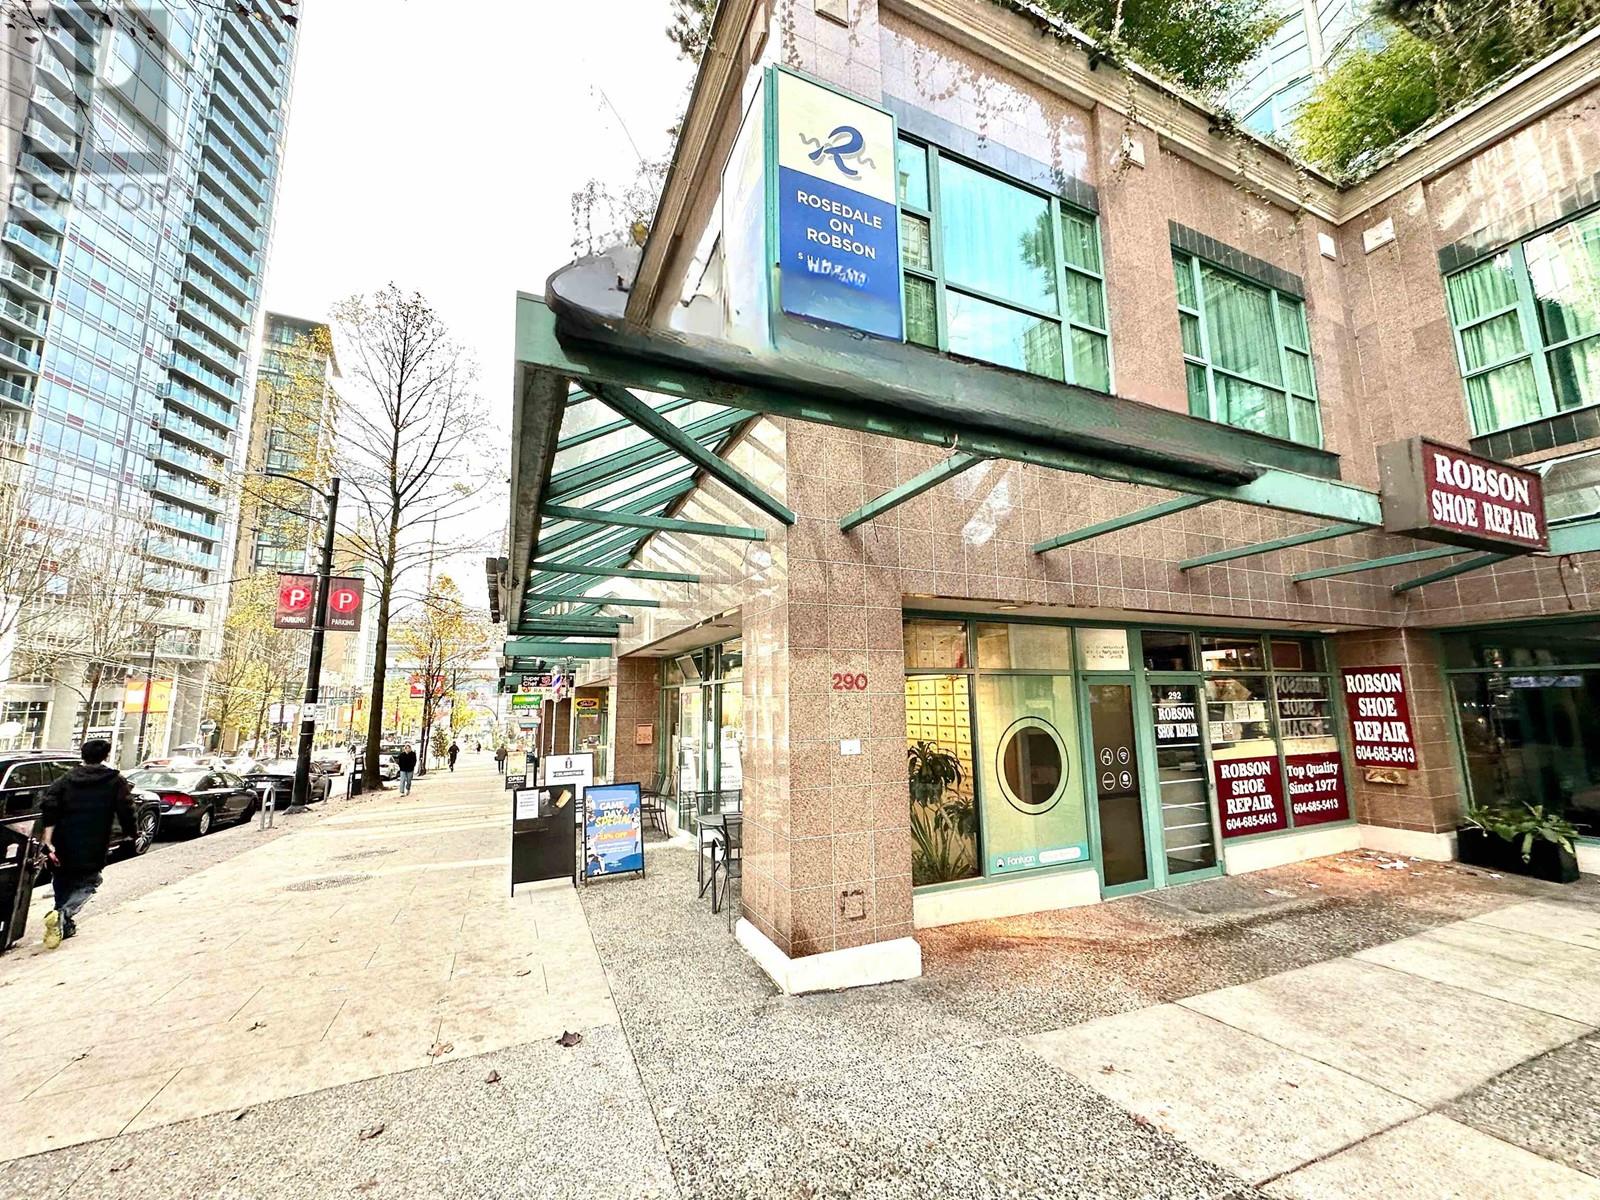 Listing Picture 9 of 9 : 290 ROBSON STREET, Vancouver / 溫哥華 - 魯藝地產 Yvonne Lu Group - MLS Medallion Club Member